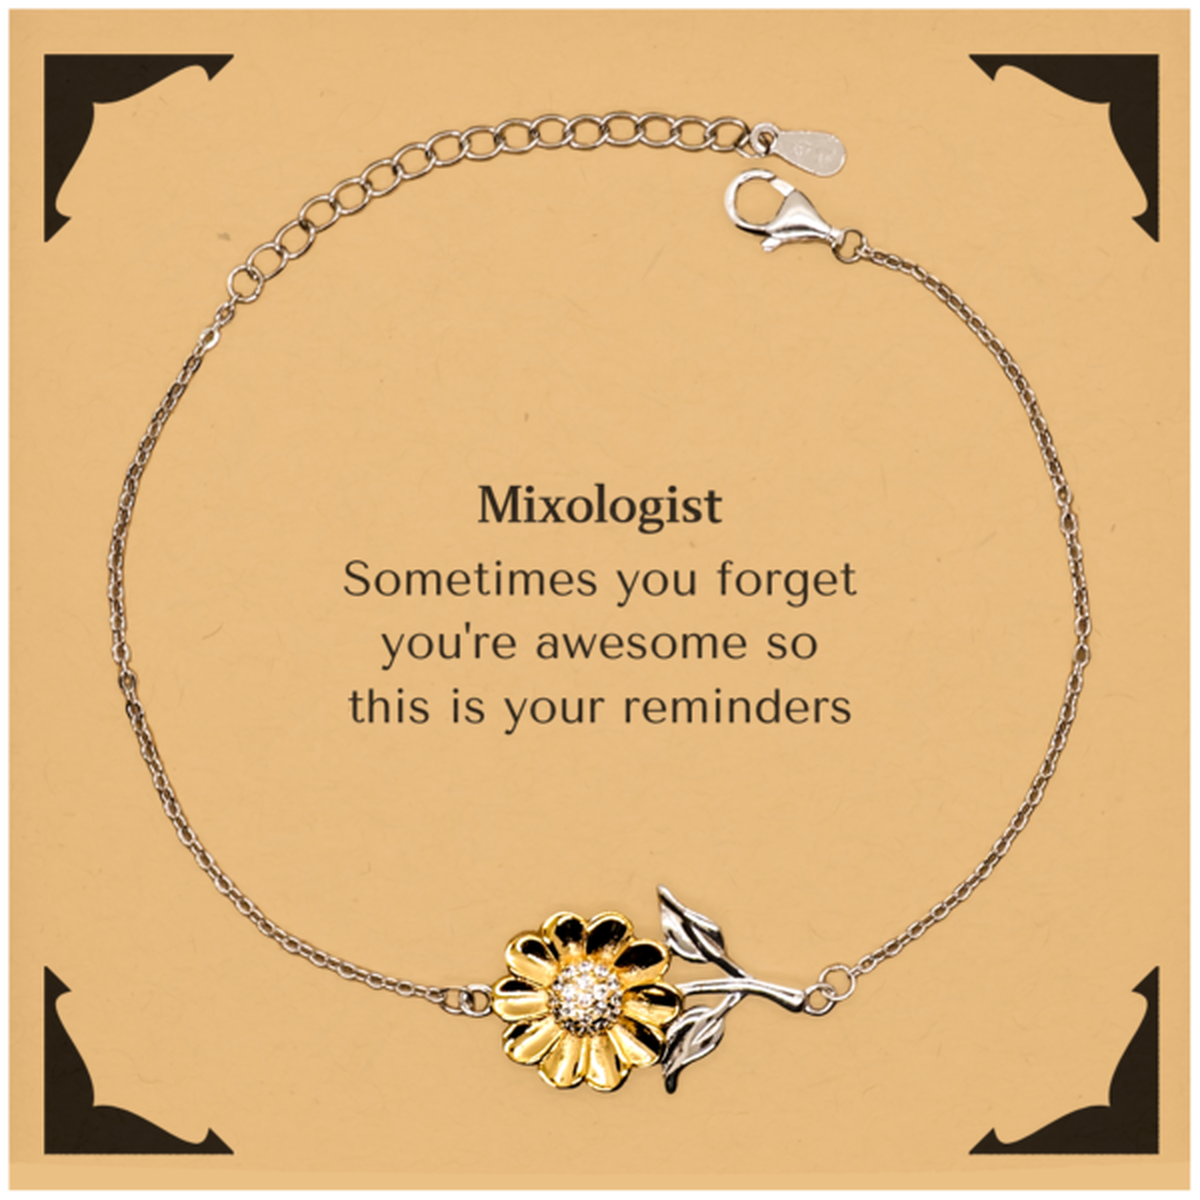 Sentimental Mixologist Sunflower Bracelet, Mixologist Sometimes you forget you're awesome so this is your reminders, Graduation Christmas Birthday Gifts for Mixologist, Men, Women, Coworkers